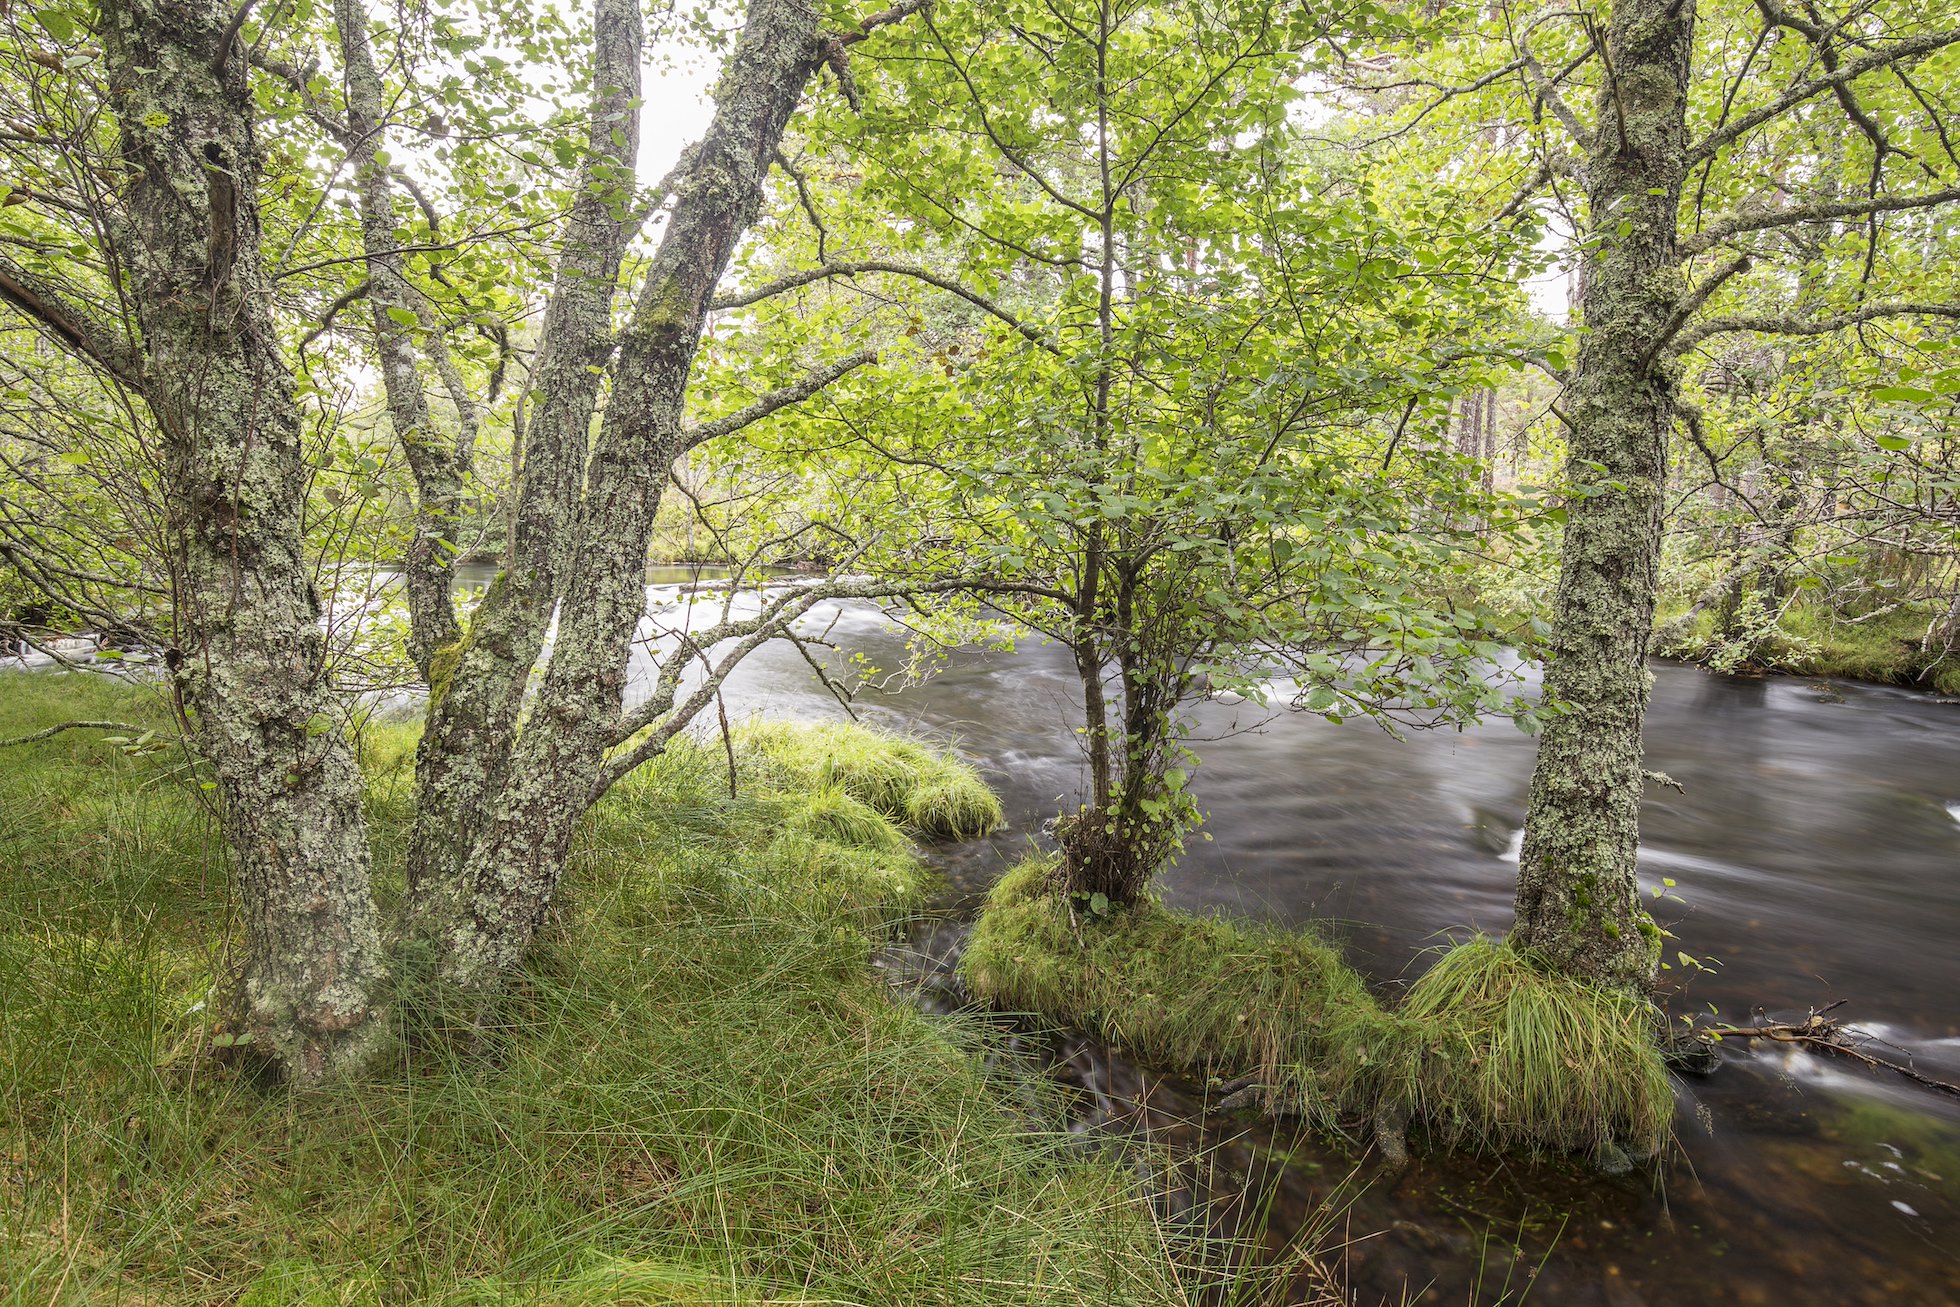 River Luineag and section of mixed natural woodland, Rothiemurchus, Cairngorms National Park, Scotland